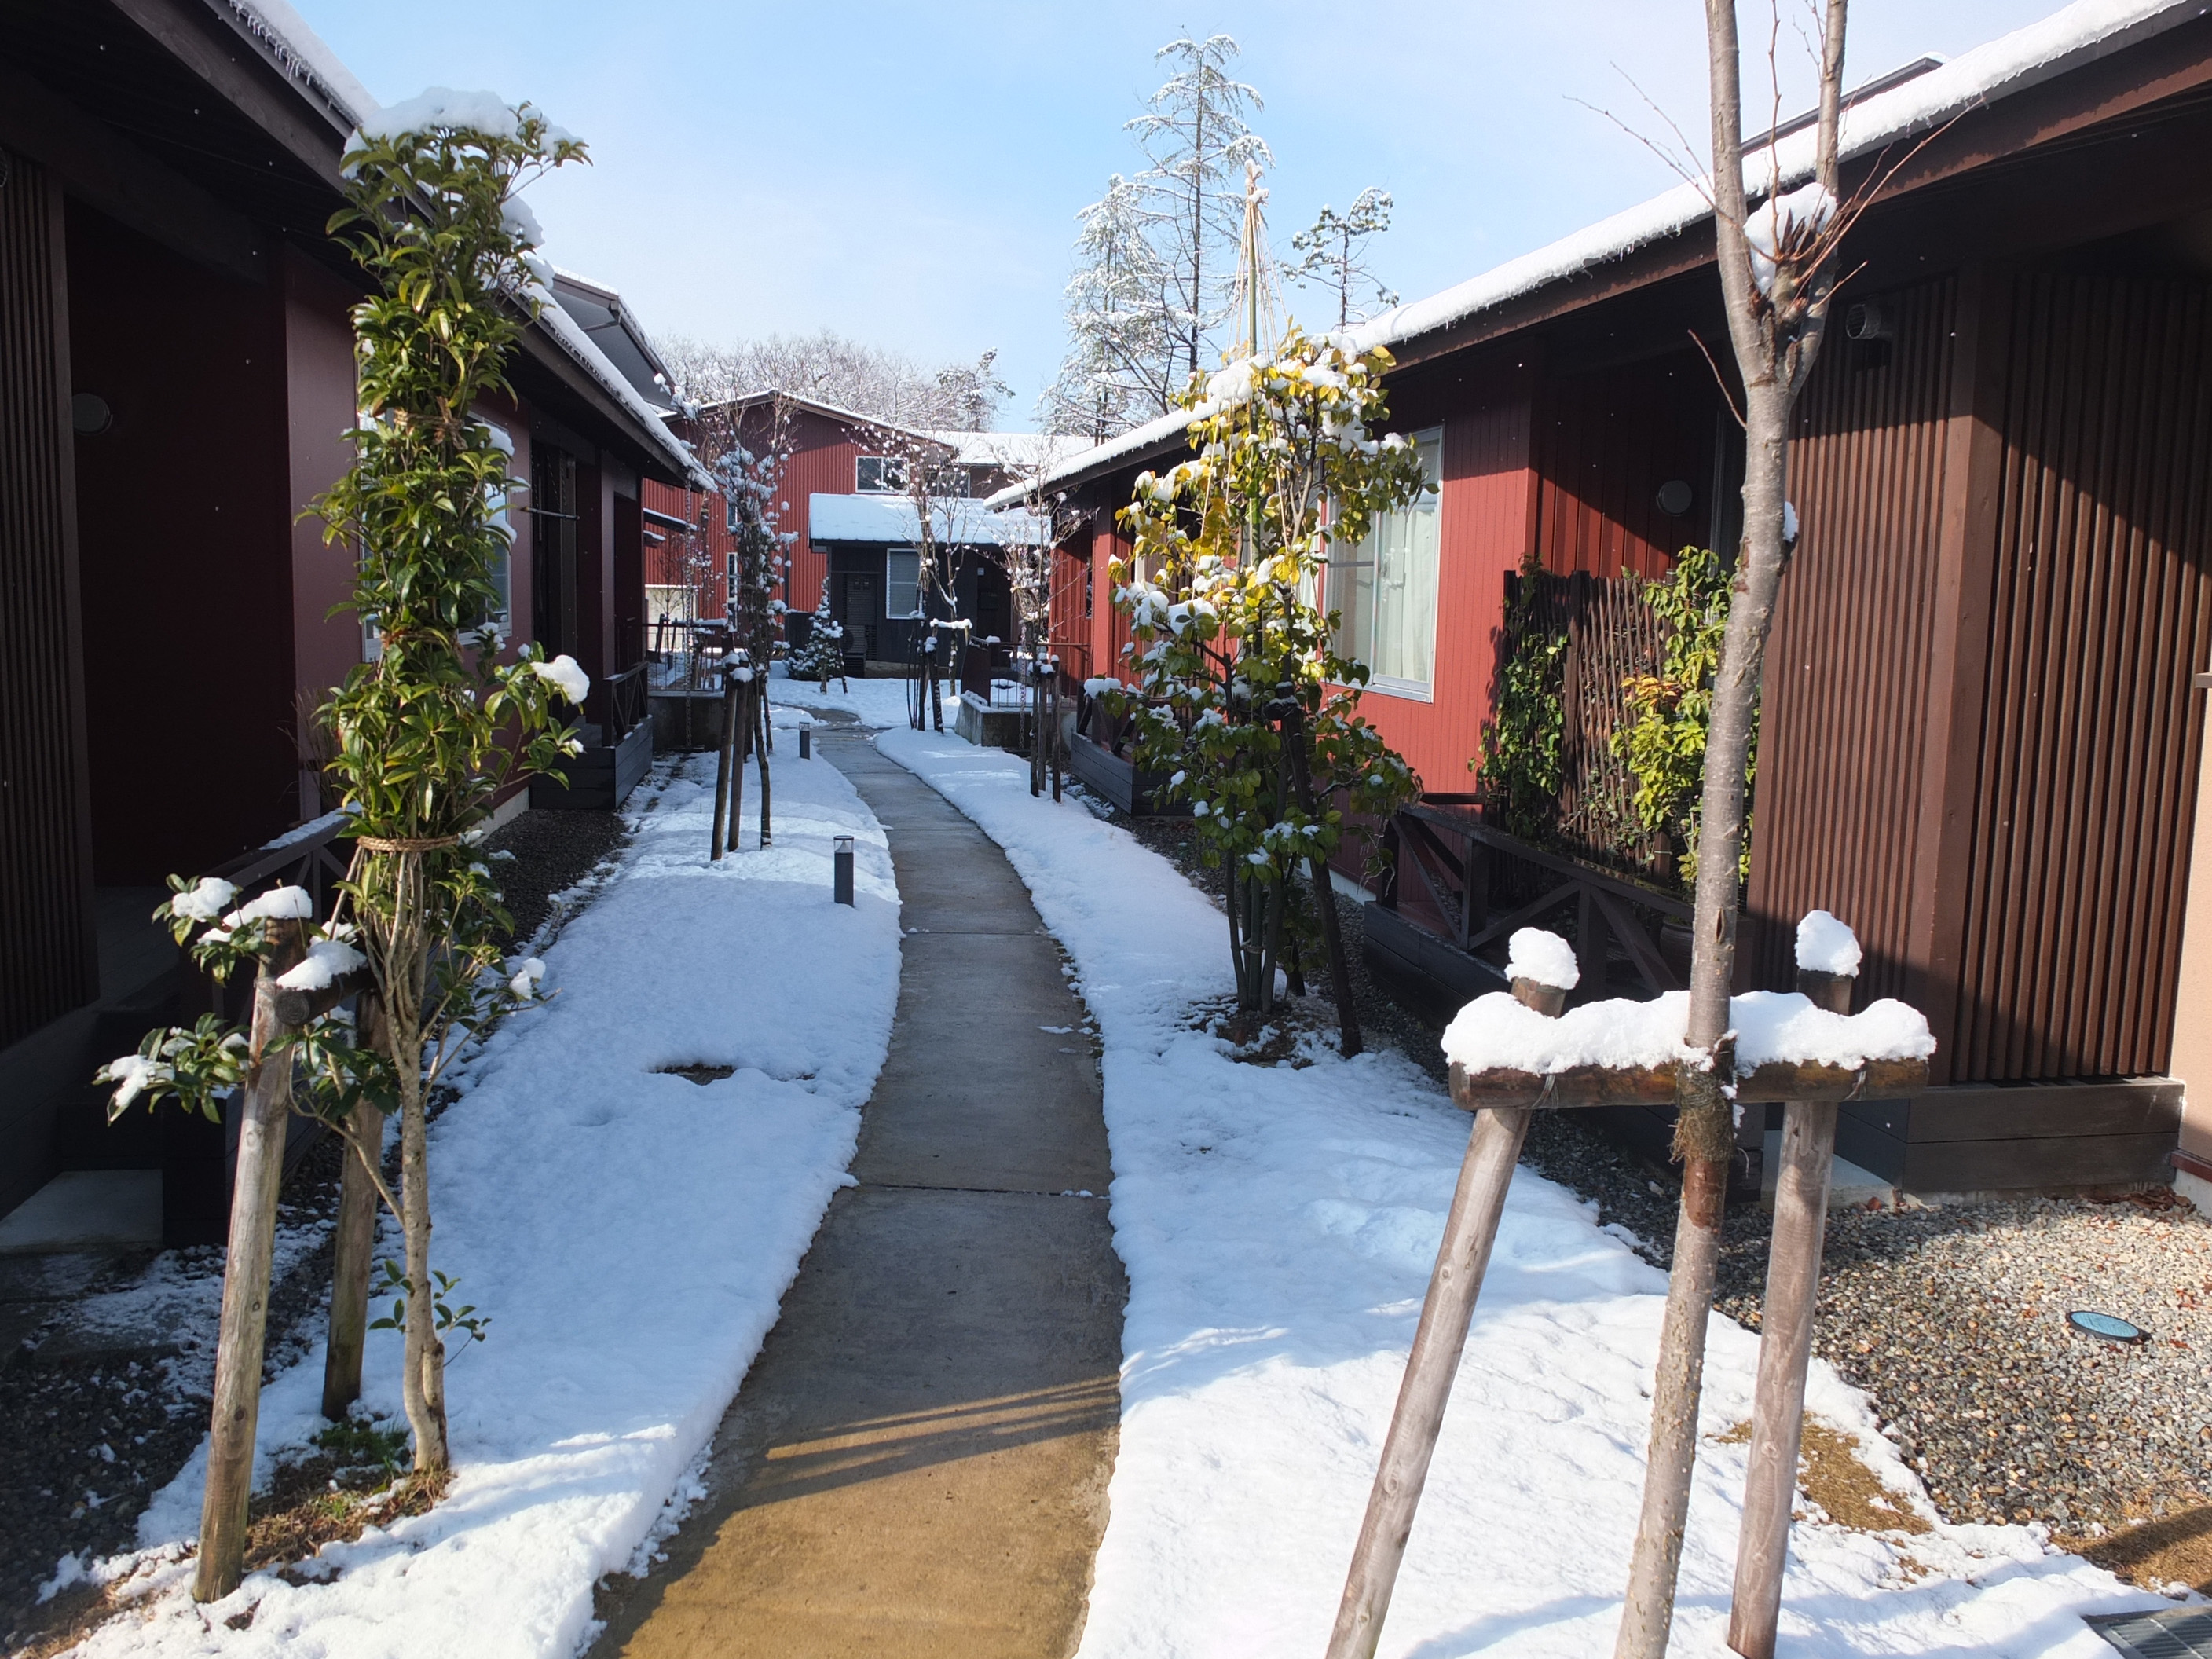 The buildings of Share Kanazawa in Ishikawa Prefecture resemble a camp or ski resort more than a center for the elderly. | ERIC JOHNSTON